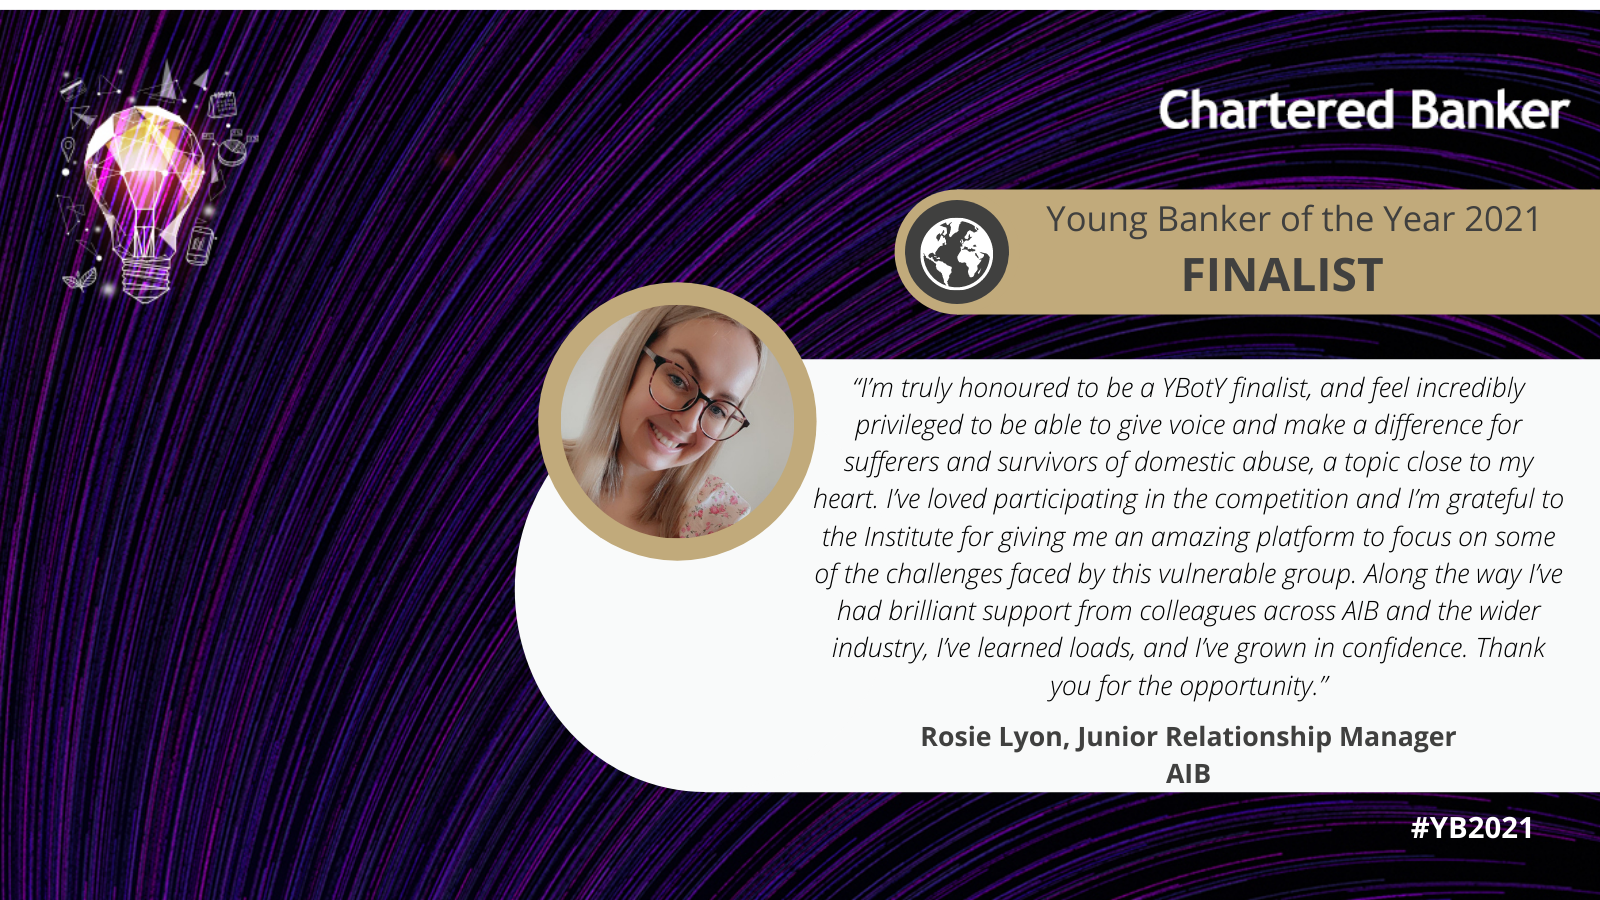 Young Banker of the Year 2021 - Rosie Lyon's Proposal